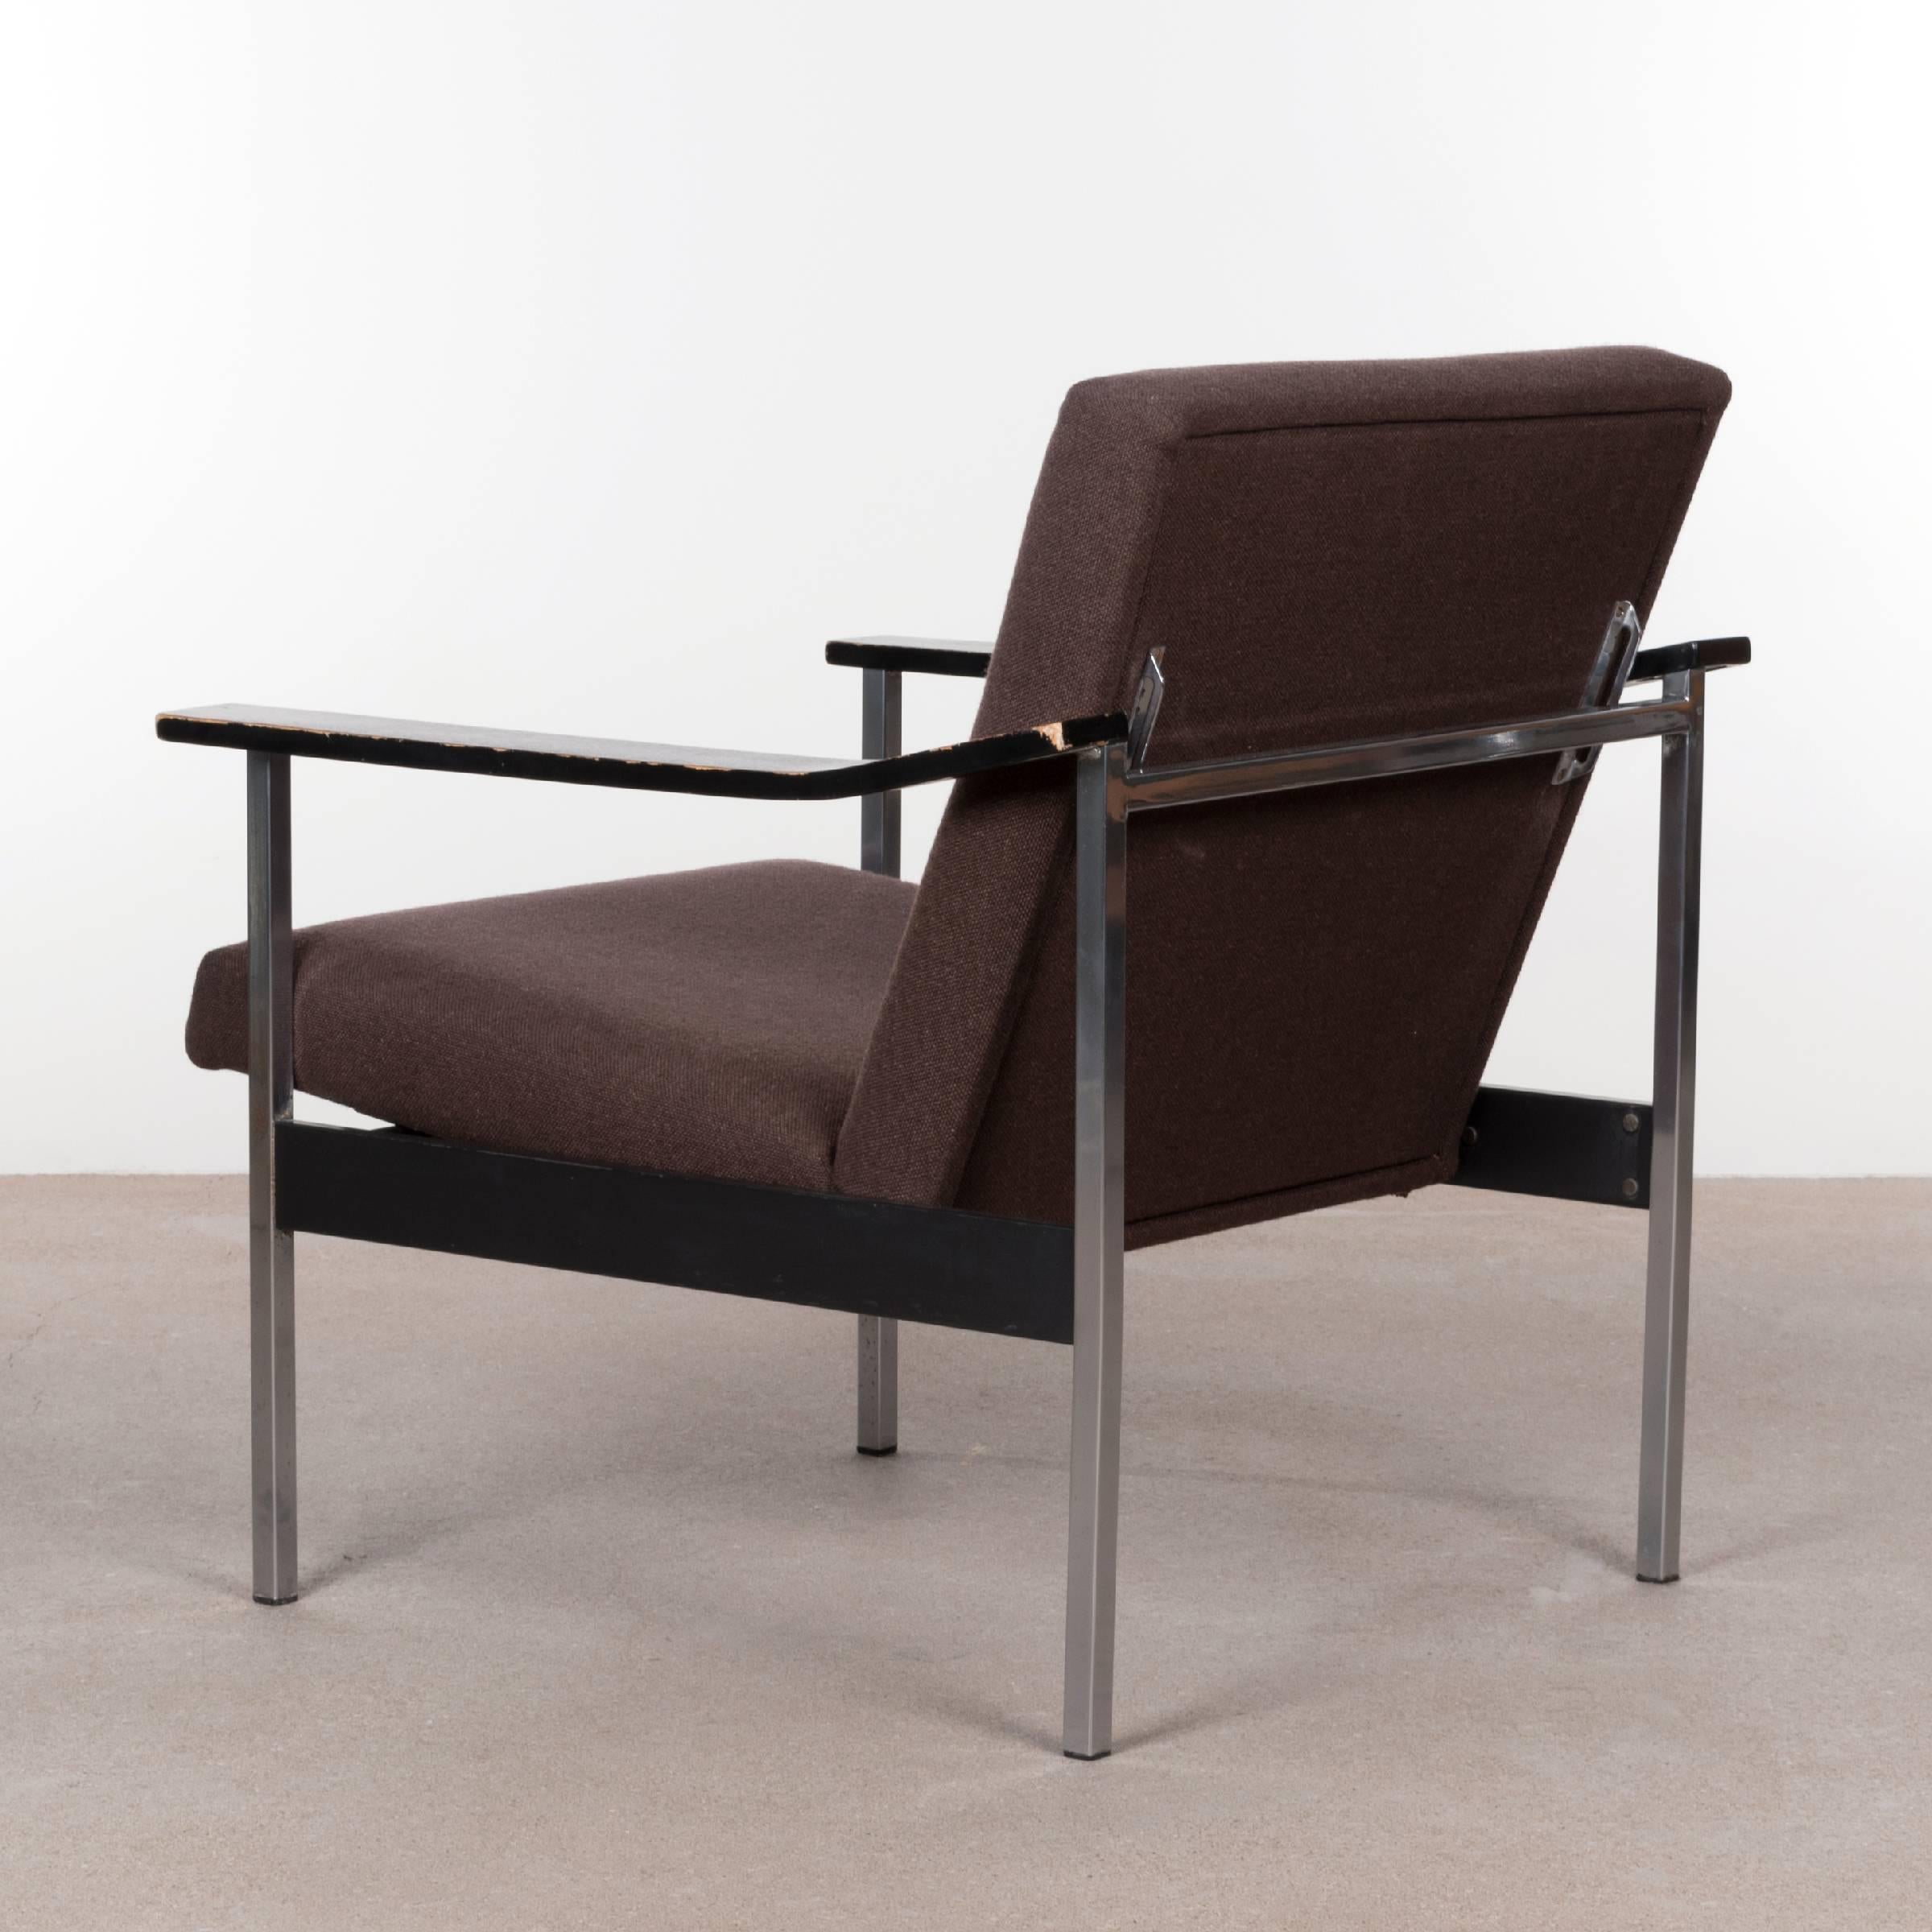 Rare easy chair by Coen de Vries for Gispen. Chrome frame, adjustable backrest in 7 positions with brown upholstery (Ploegstof) and black stained armrest. All in original good condition. Only slight traces of use on frame and armrests. Contact us